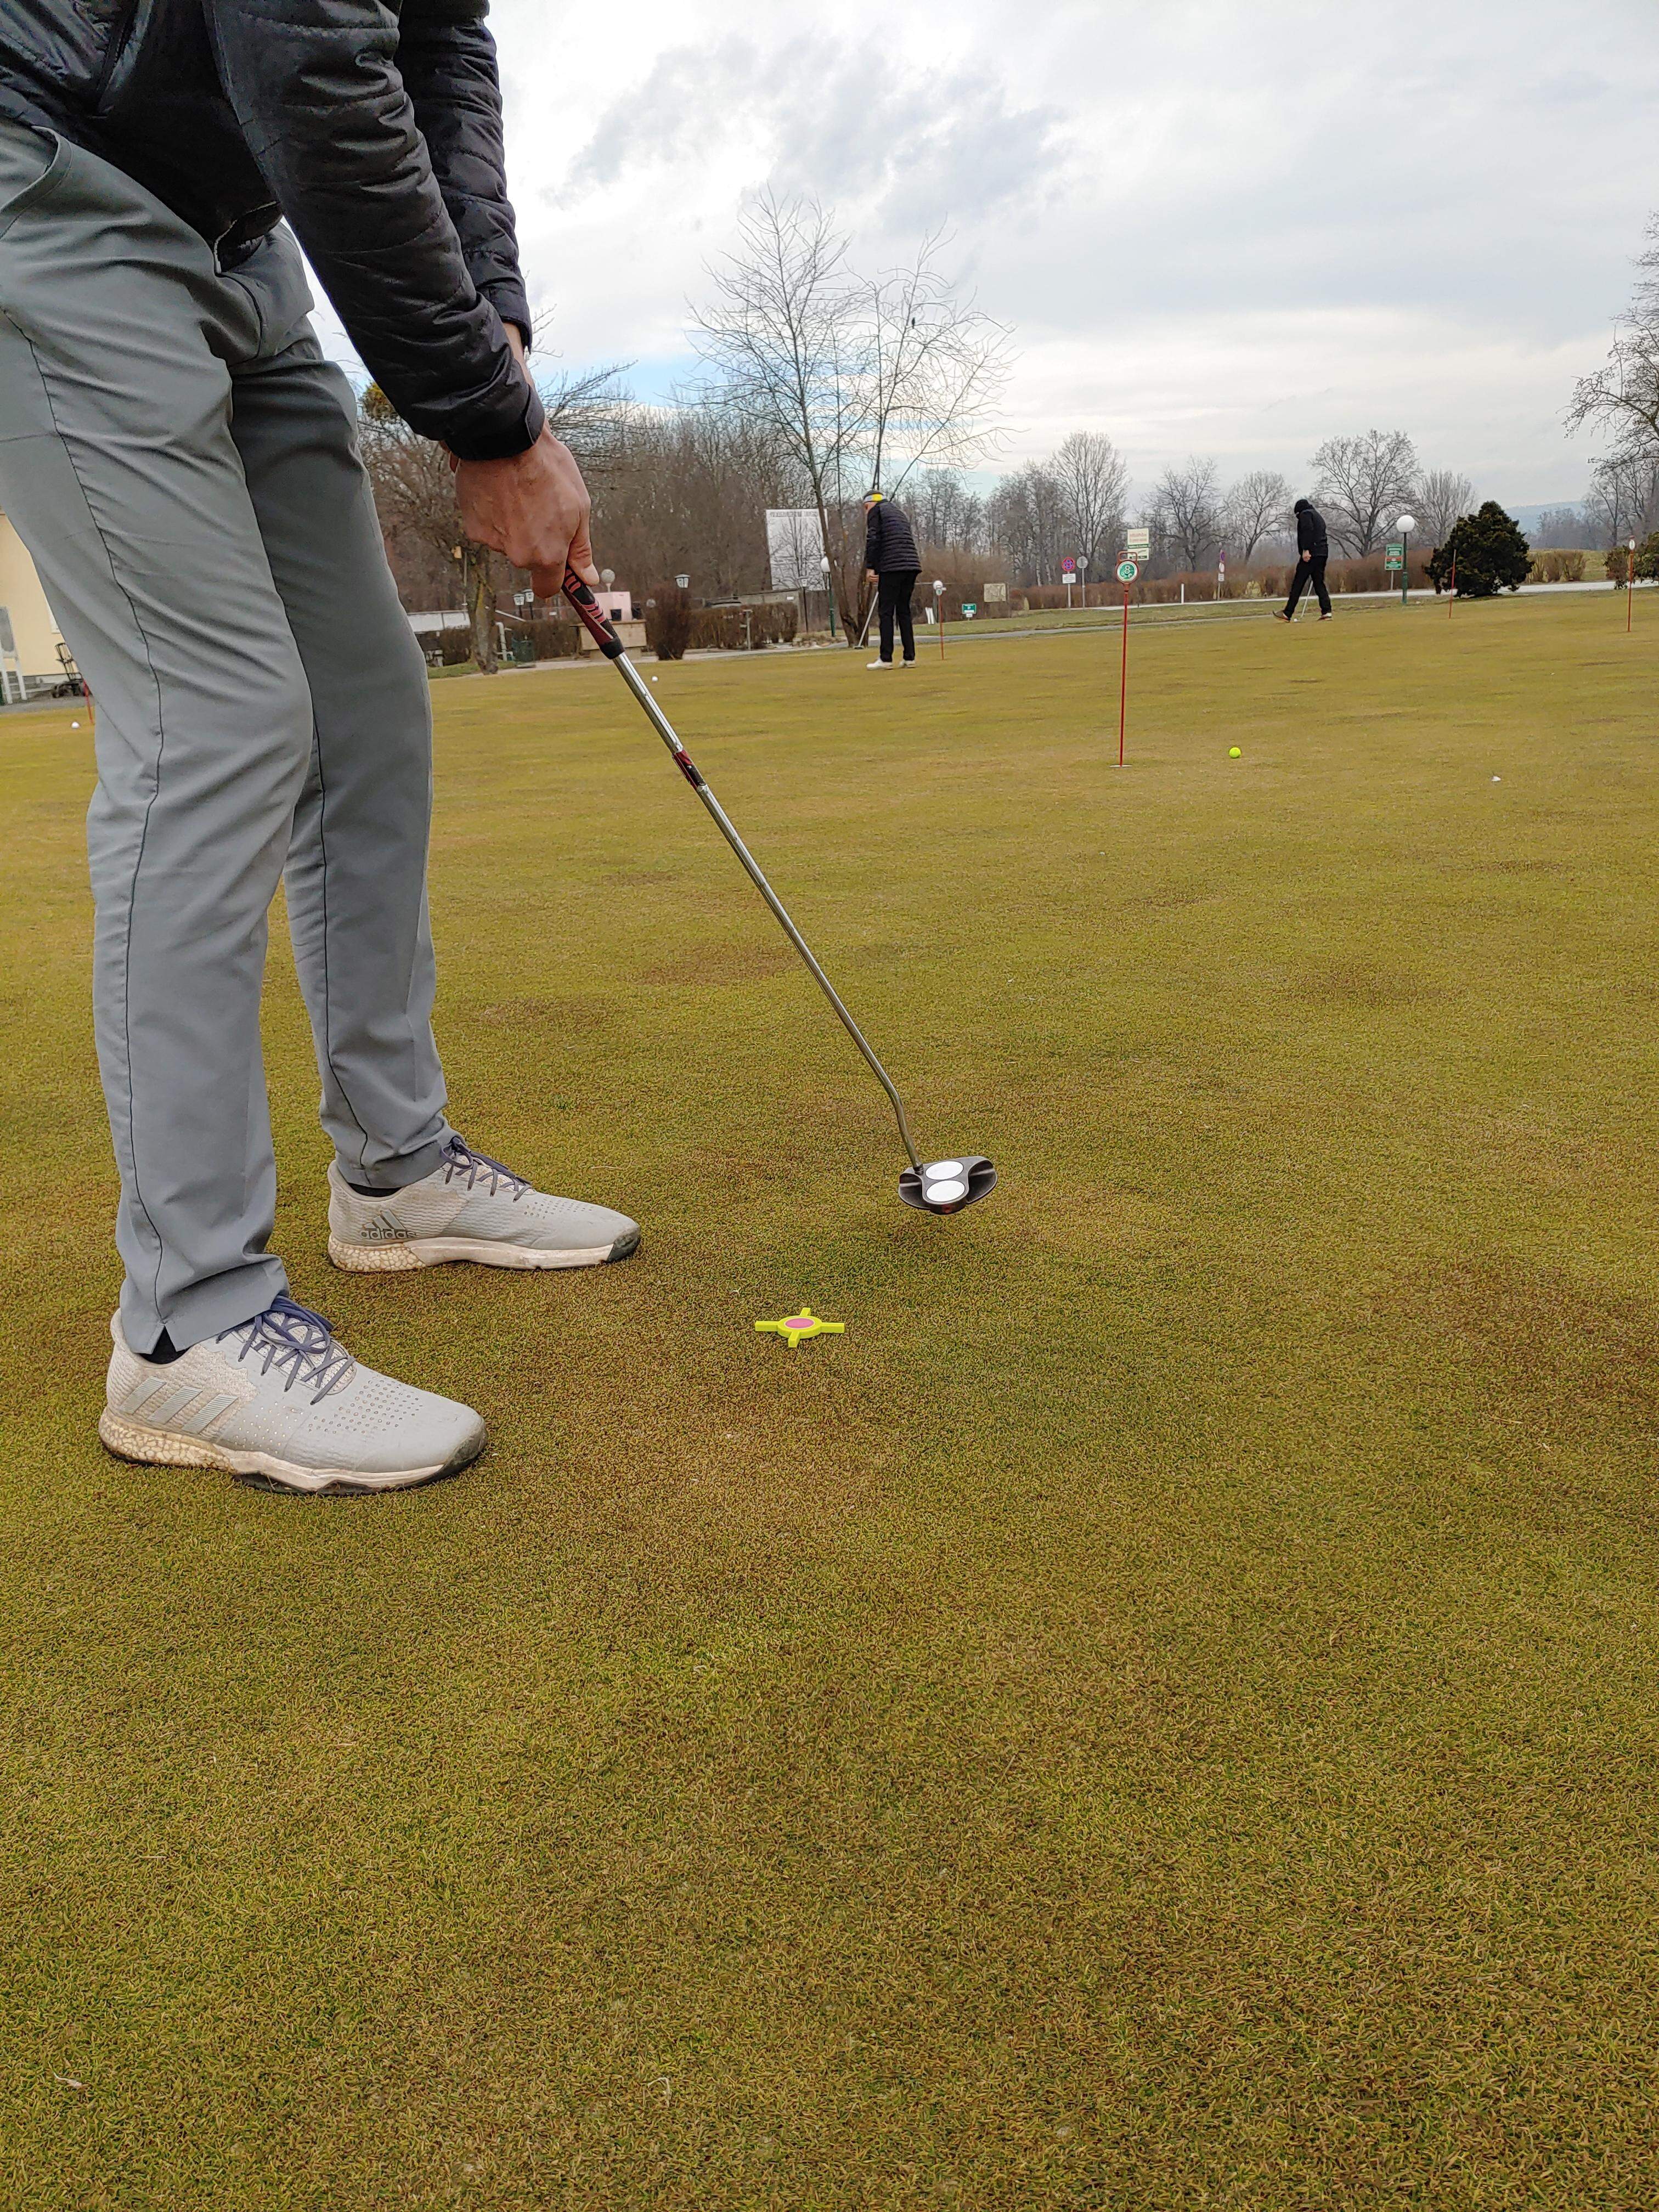 analysis: Adjust Pocket Pro slightly to the left or reduce speed. Then he falls!